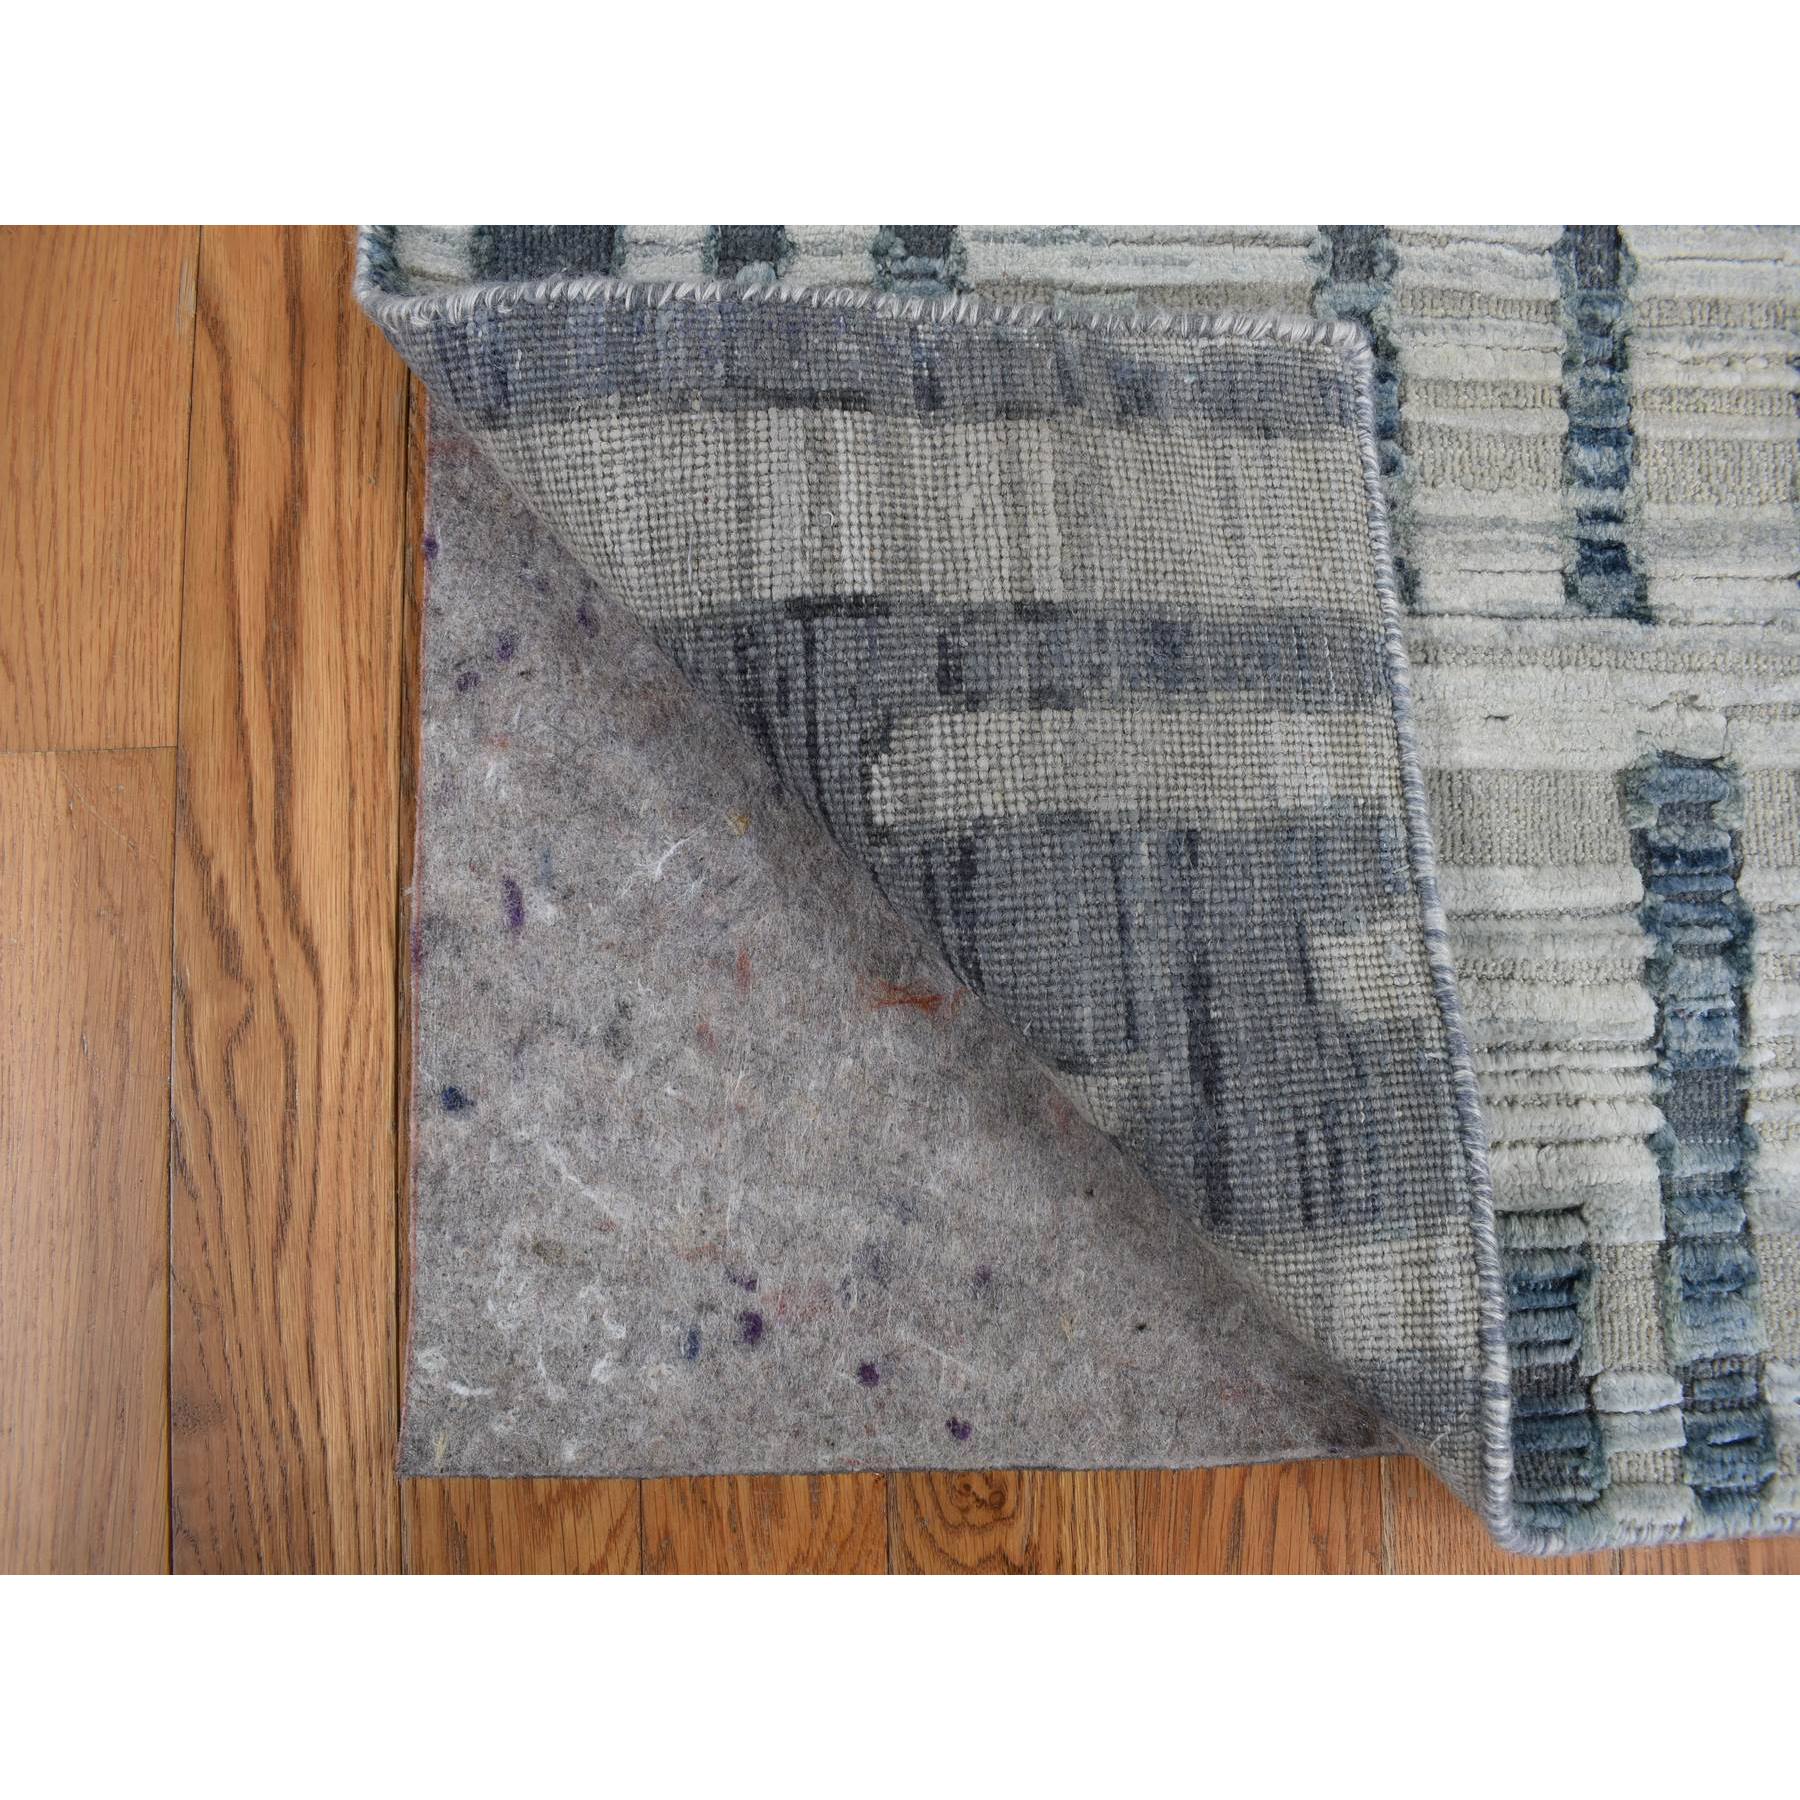  Silk Hand-Knotted Area Rug 2'6